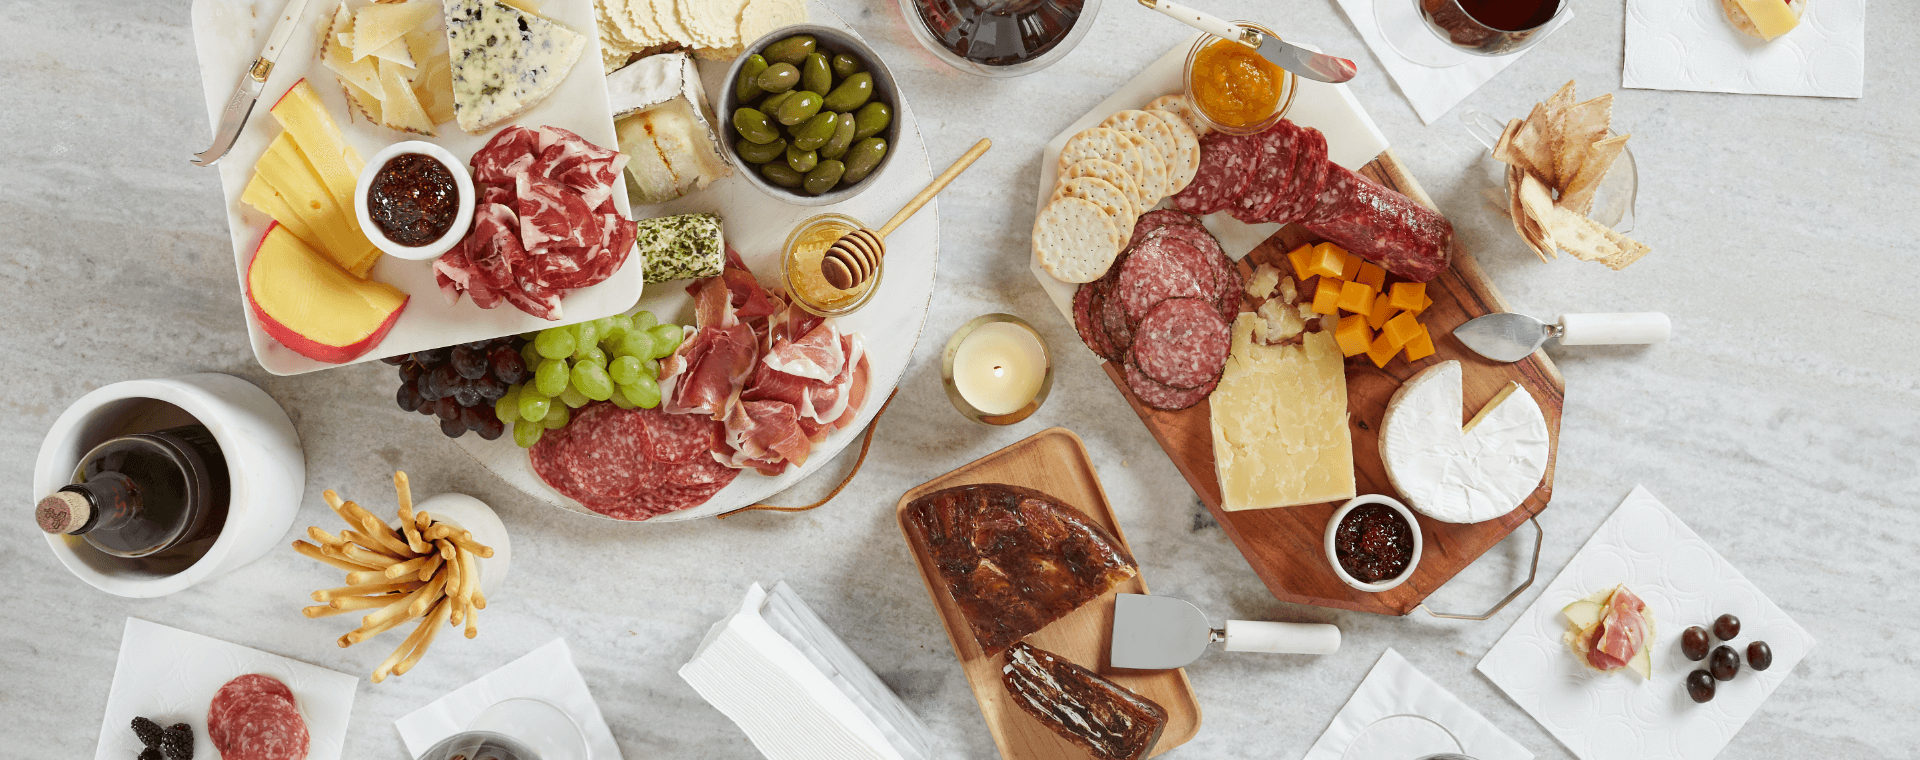 Charcuterie display on a table.